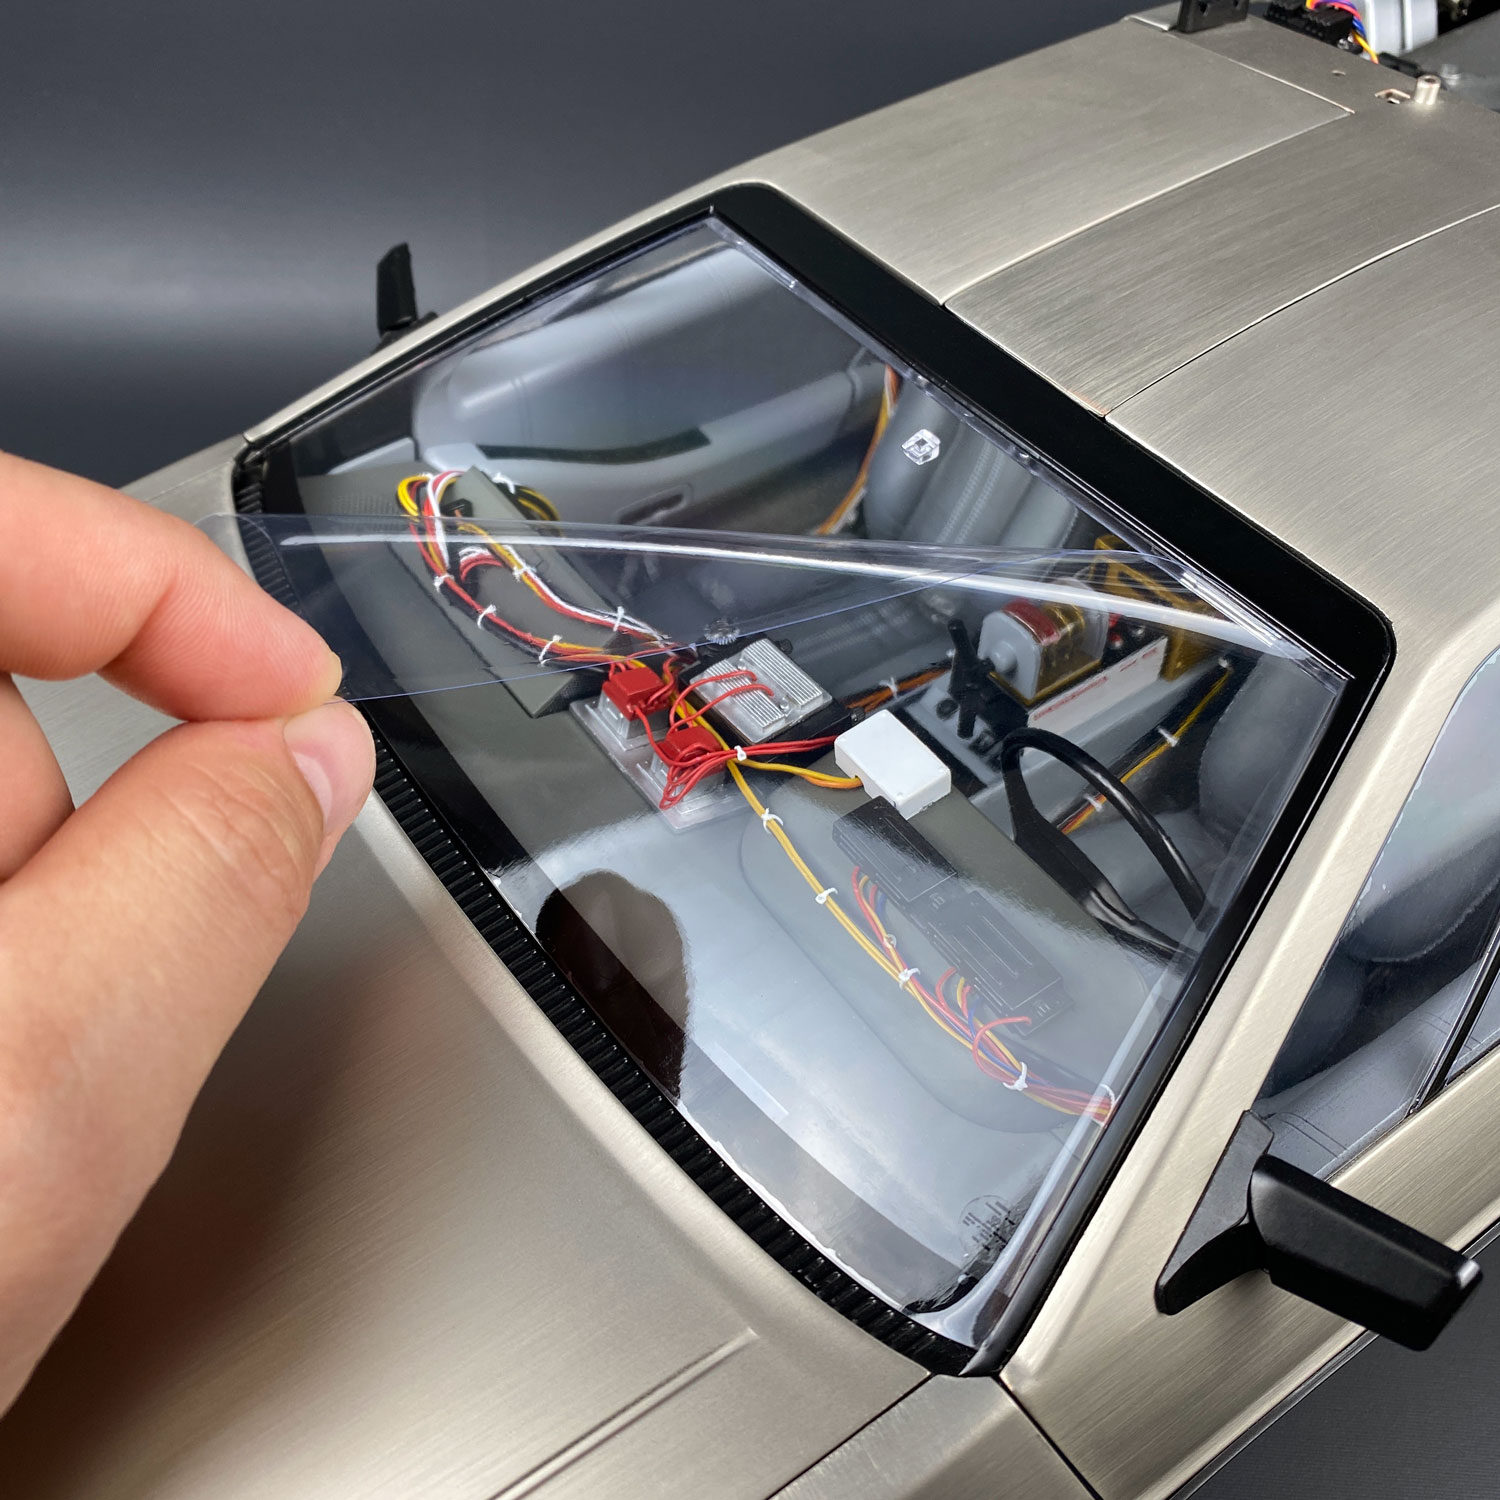 Applying Static Cling Window Protector to Eaglemoss DeLorean